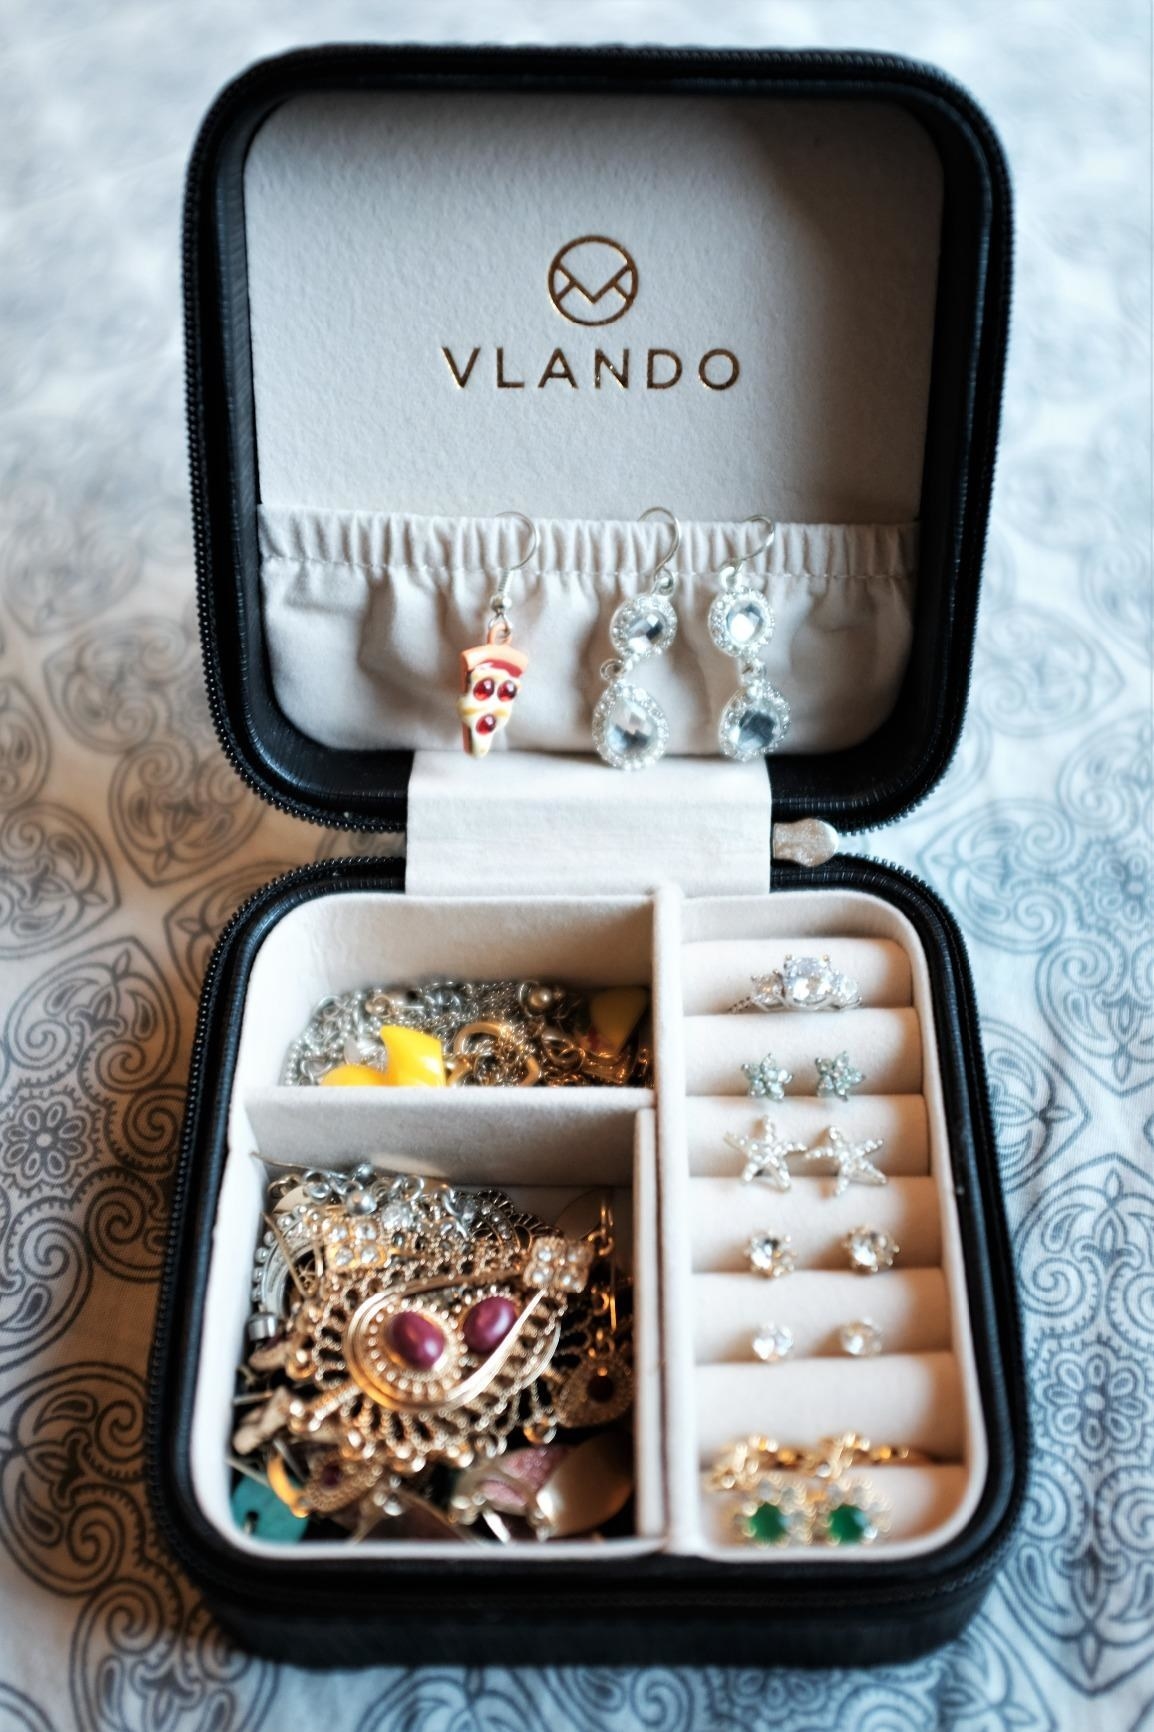 Reviewer pic of the square box filled with an assortment of jewelry